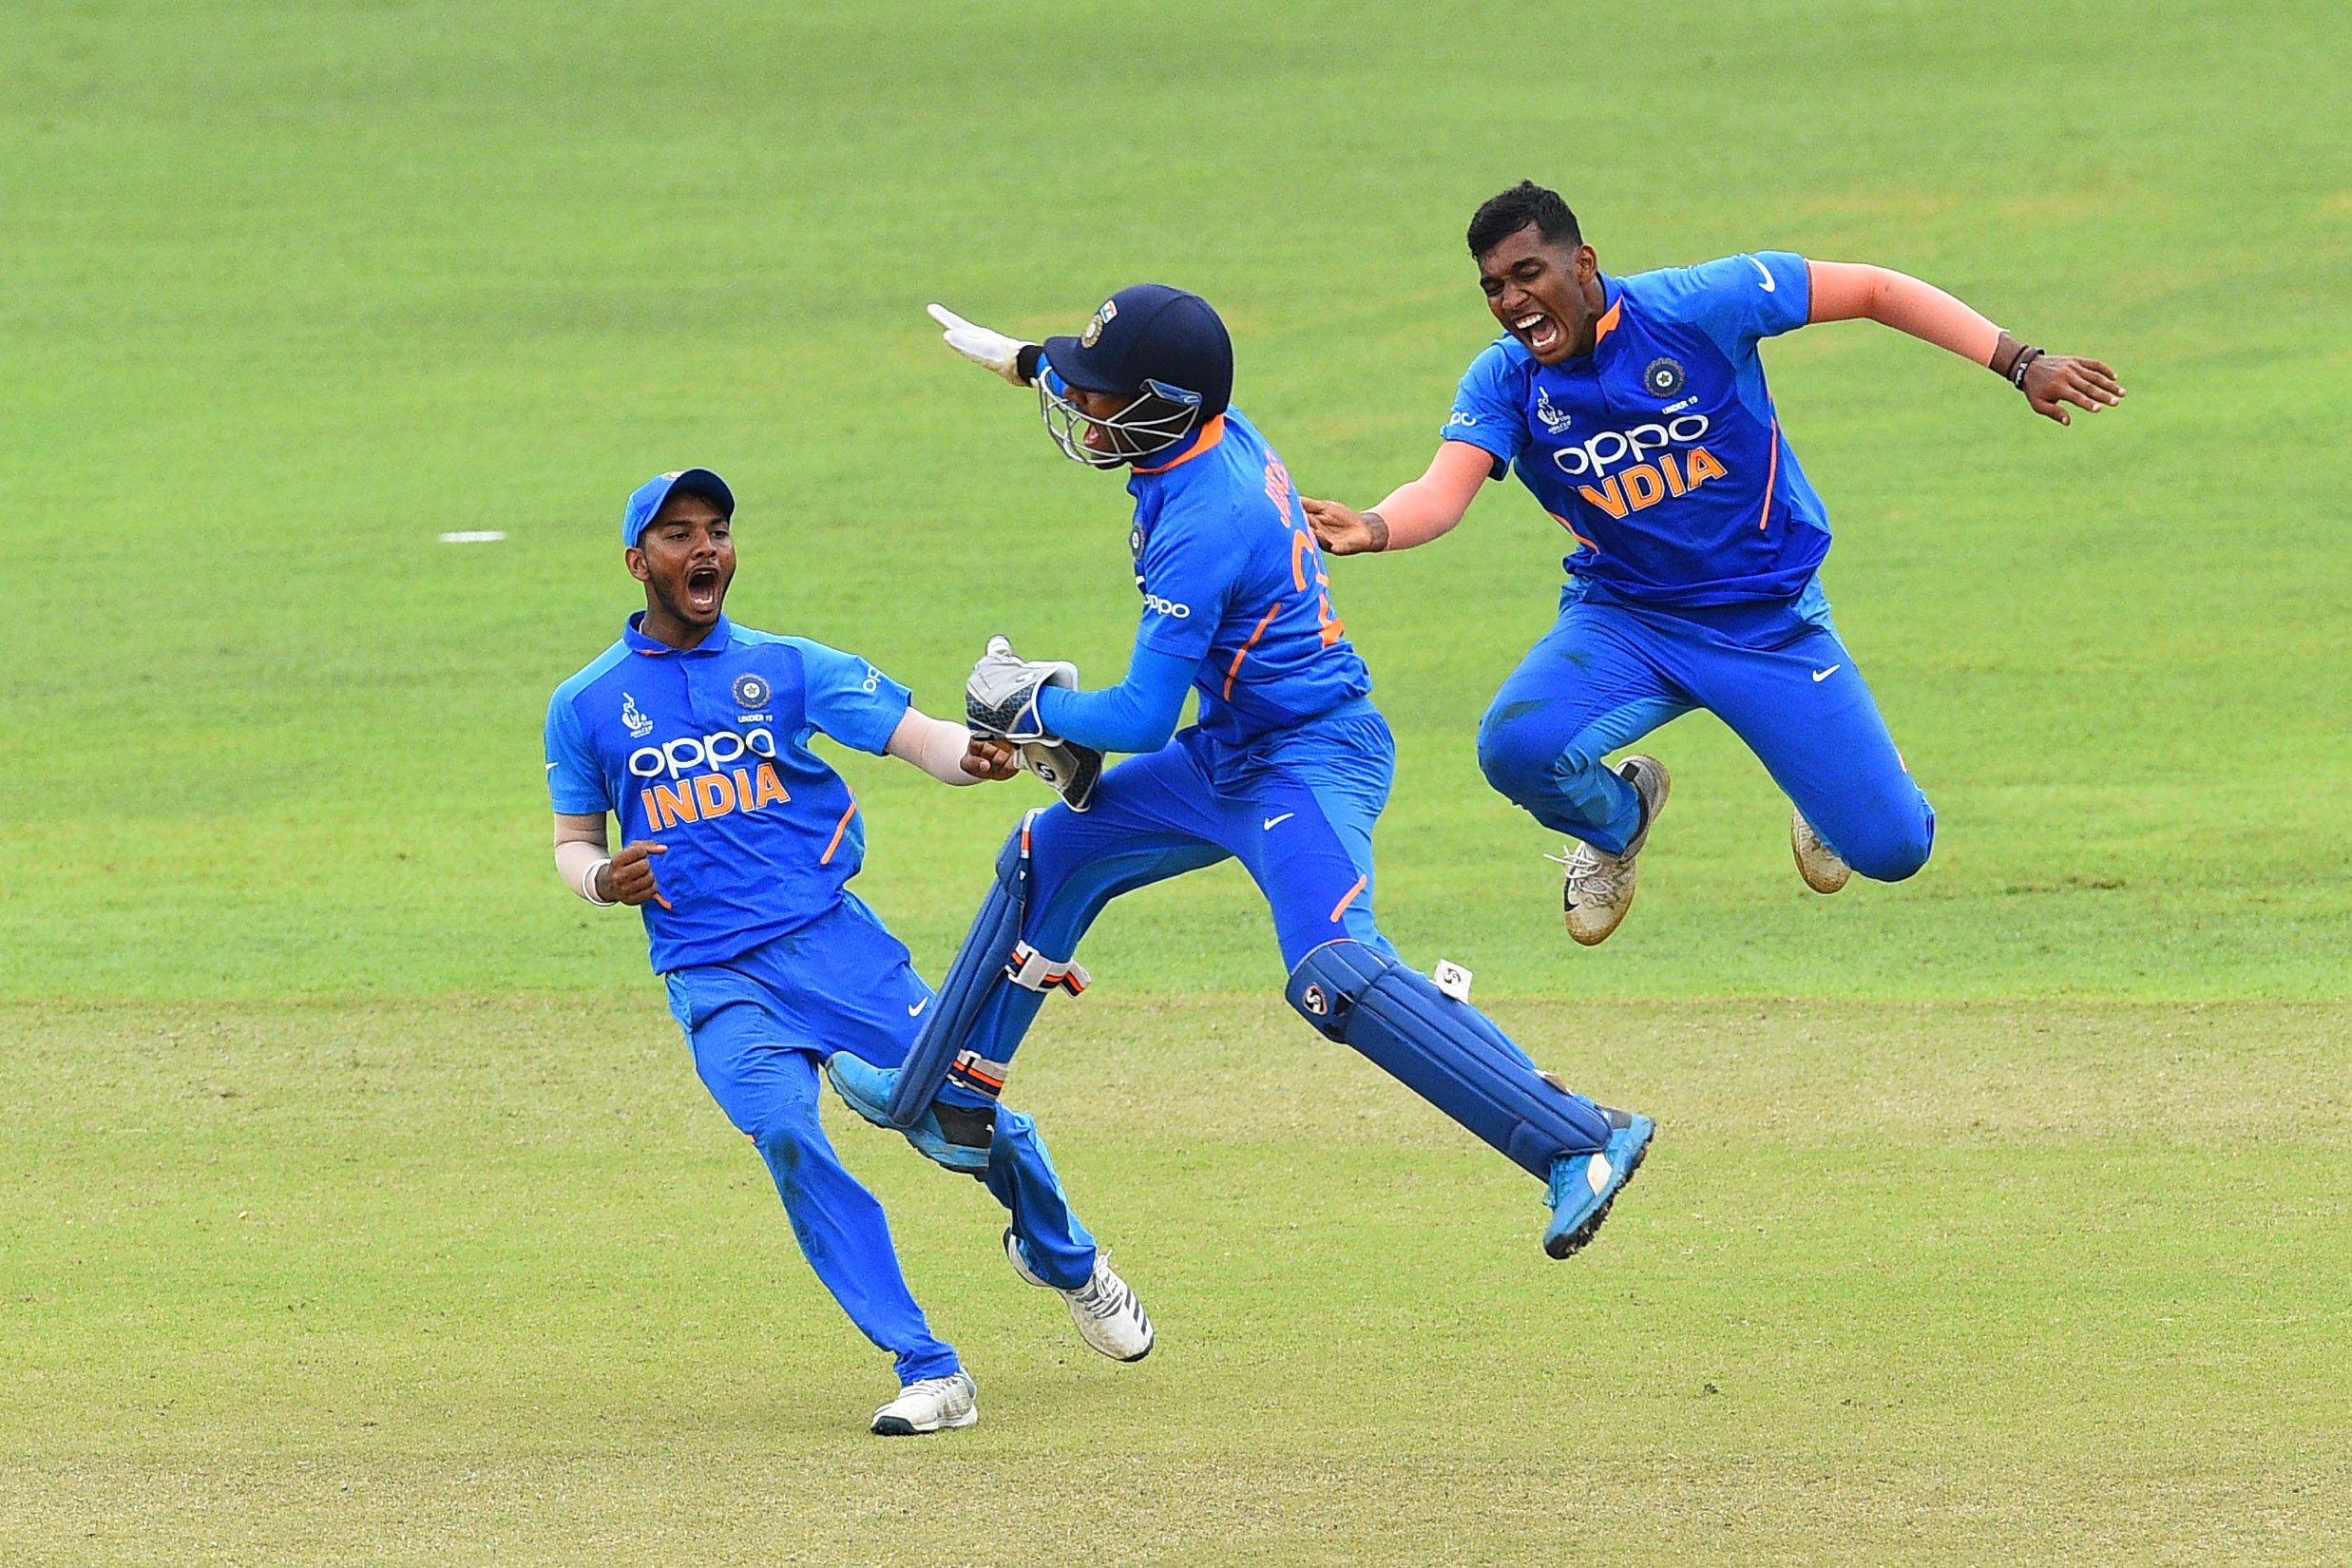 India U19 beat Bangladesh U19 by 5 runs to retain Asia Cup in thriller